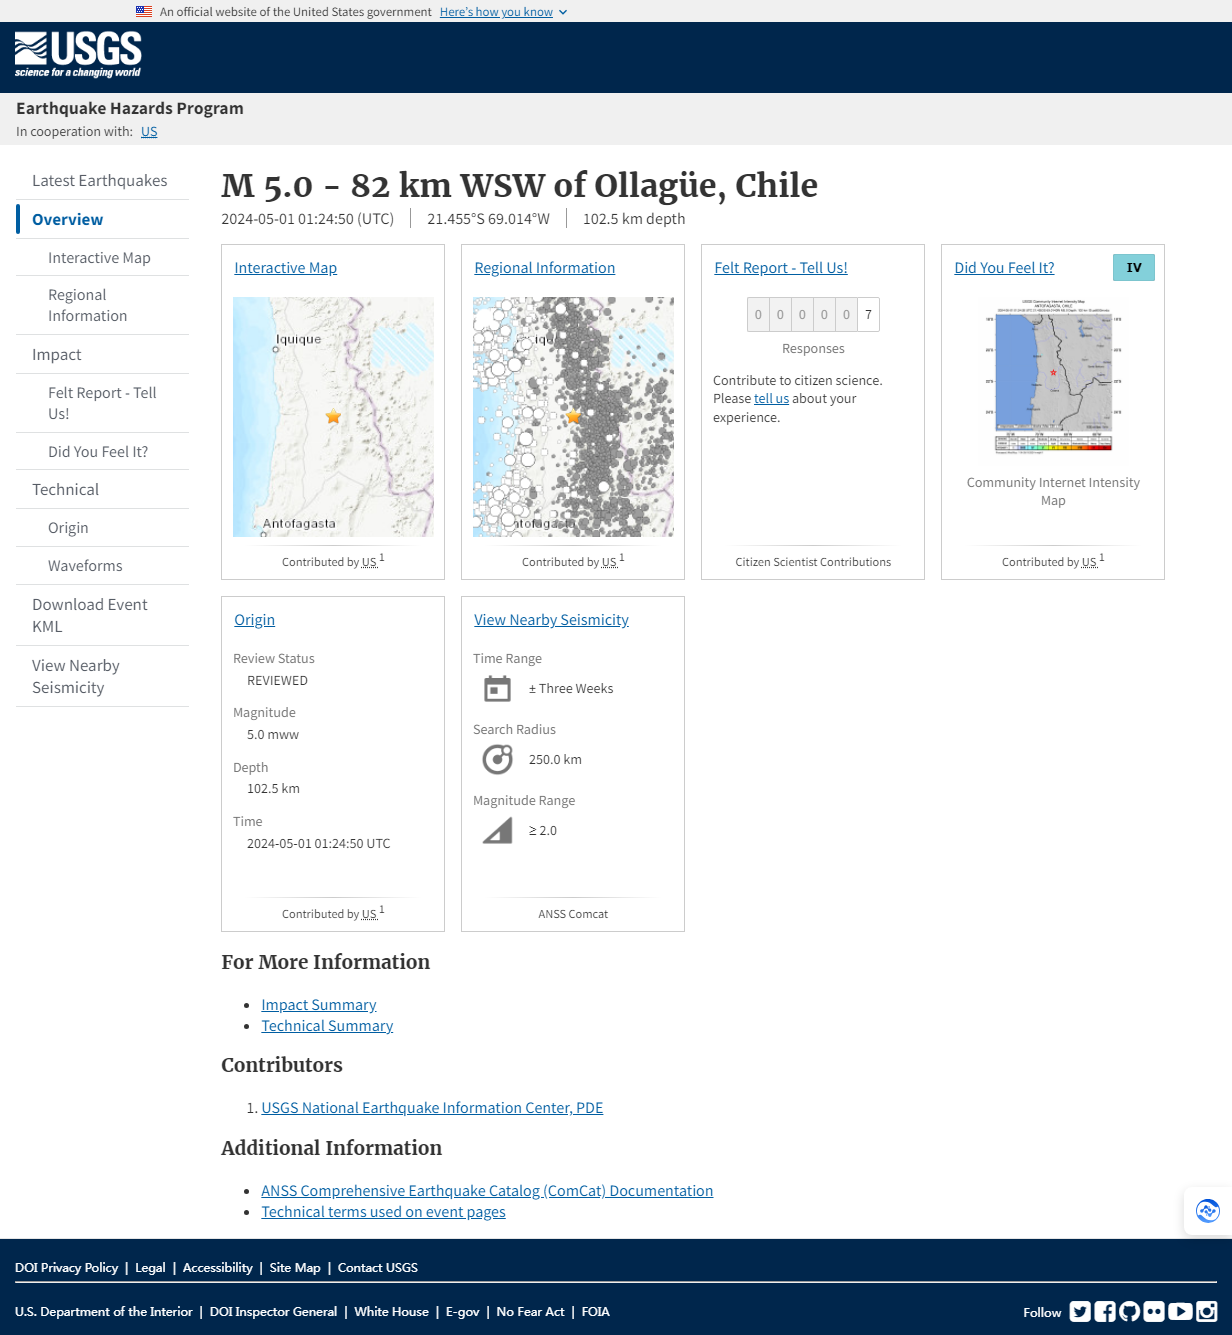 M 5.0 - 82 km WSW of Ollagüe, Chile.png